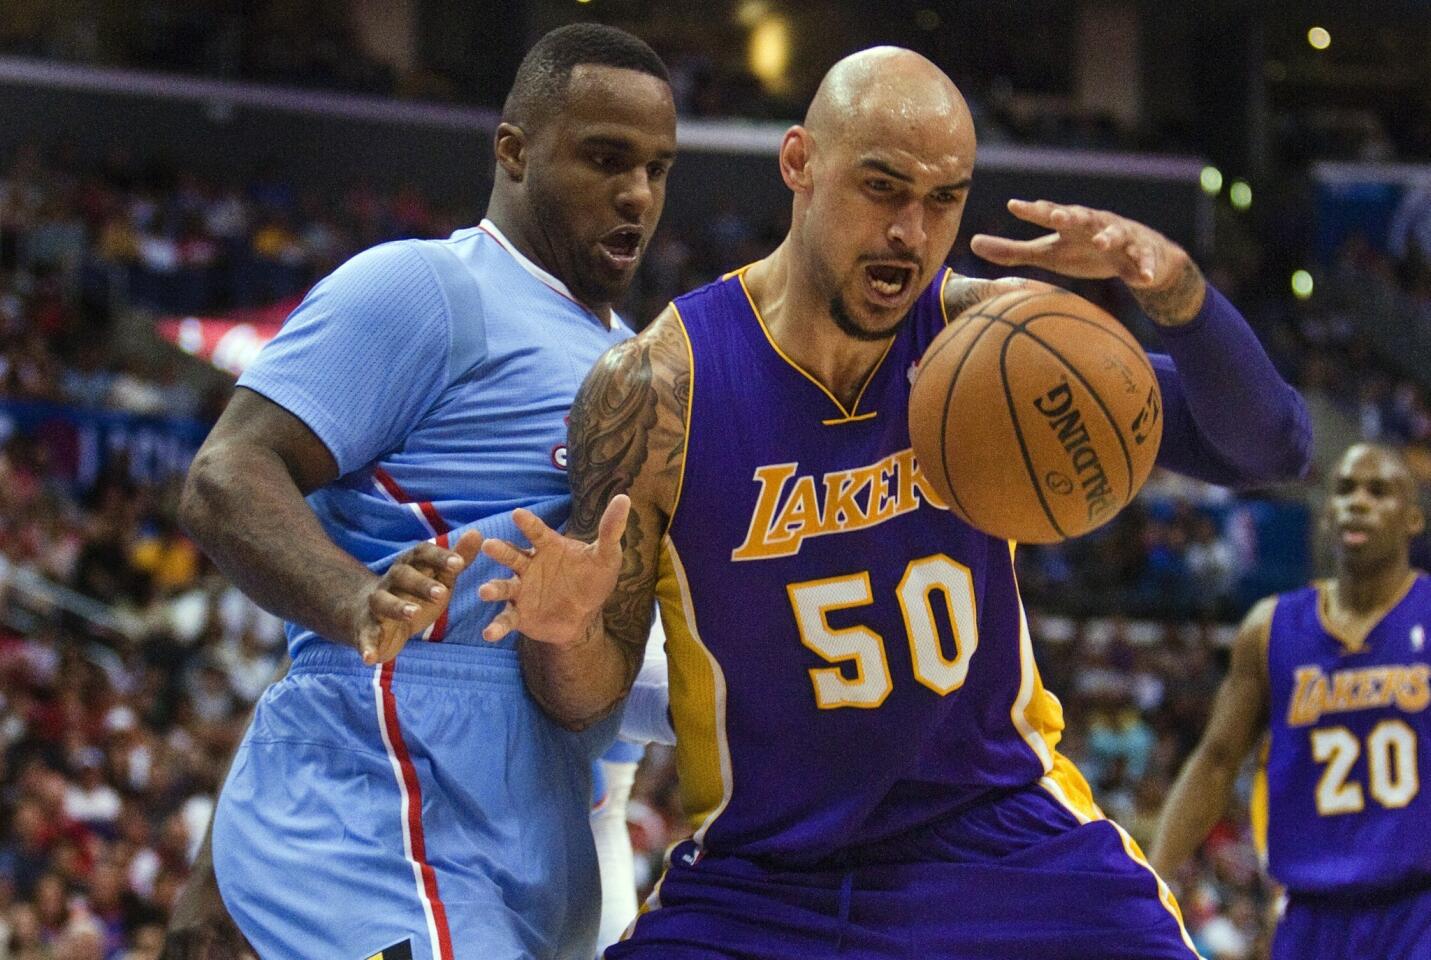 Lakers center Robert Sacre, right, beats Clippers forward Glen Davis for a rebound during the second half of the Clippers' 120-97 win at Staples Center.